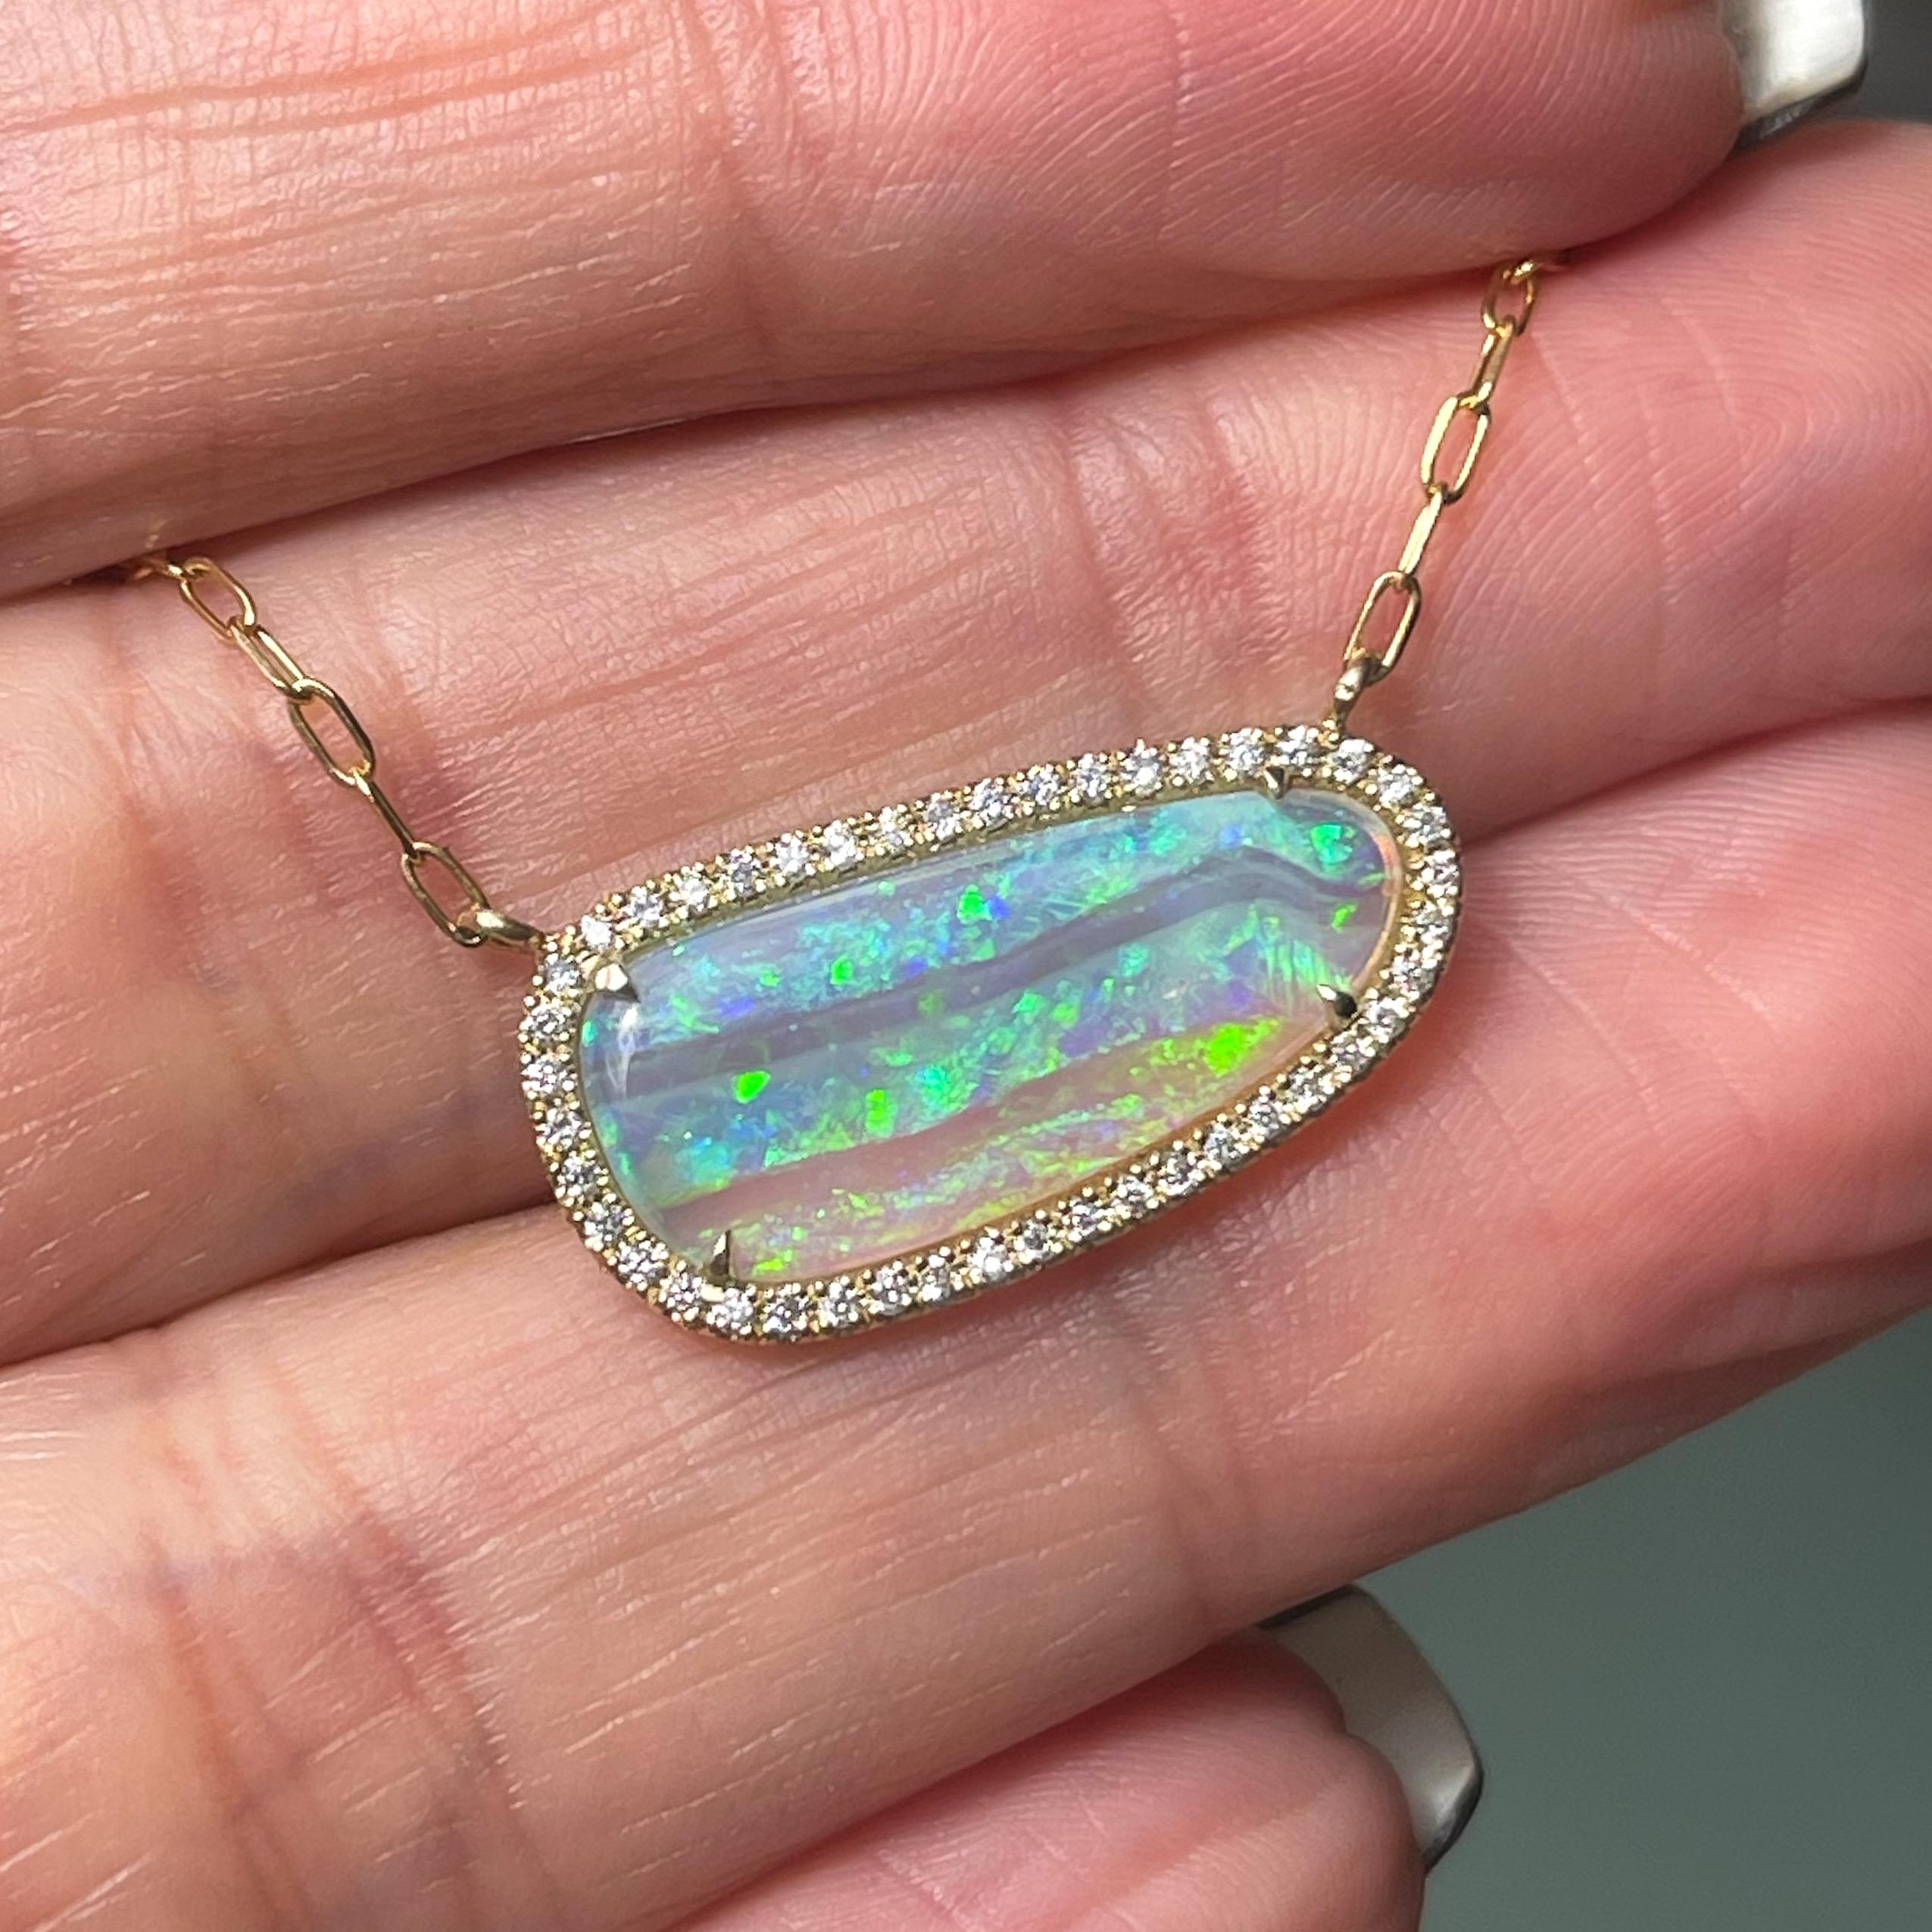 Fresh tracks carve through the facade of this Australian Opal Necklace. The Crystal Opal glistens like fresh powder in the sun, surrounded by a halo of pave diamonds, each one glistening like a tiny snowflake. The gold opal necklace tells a story of